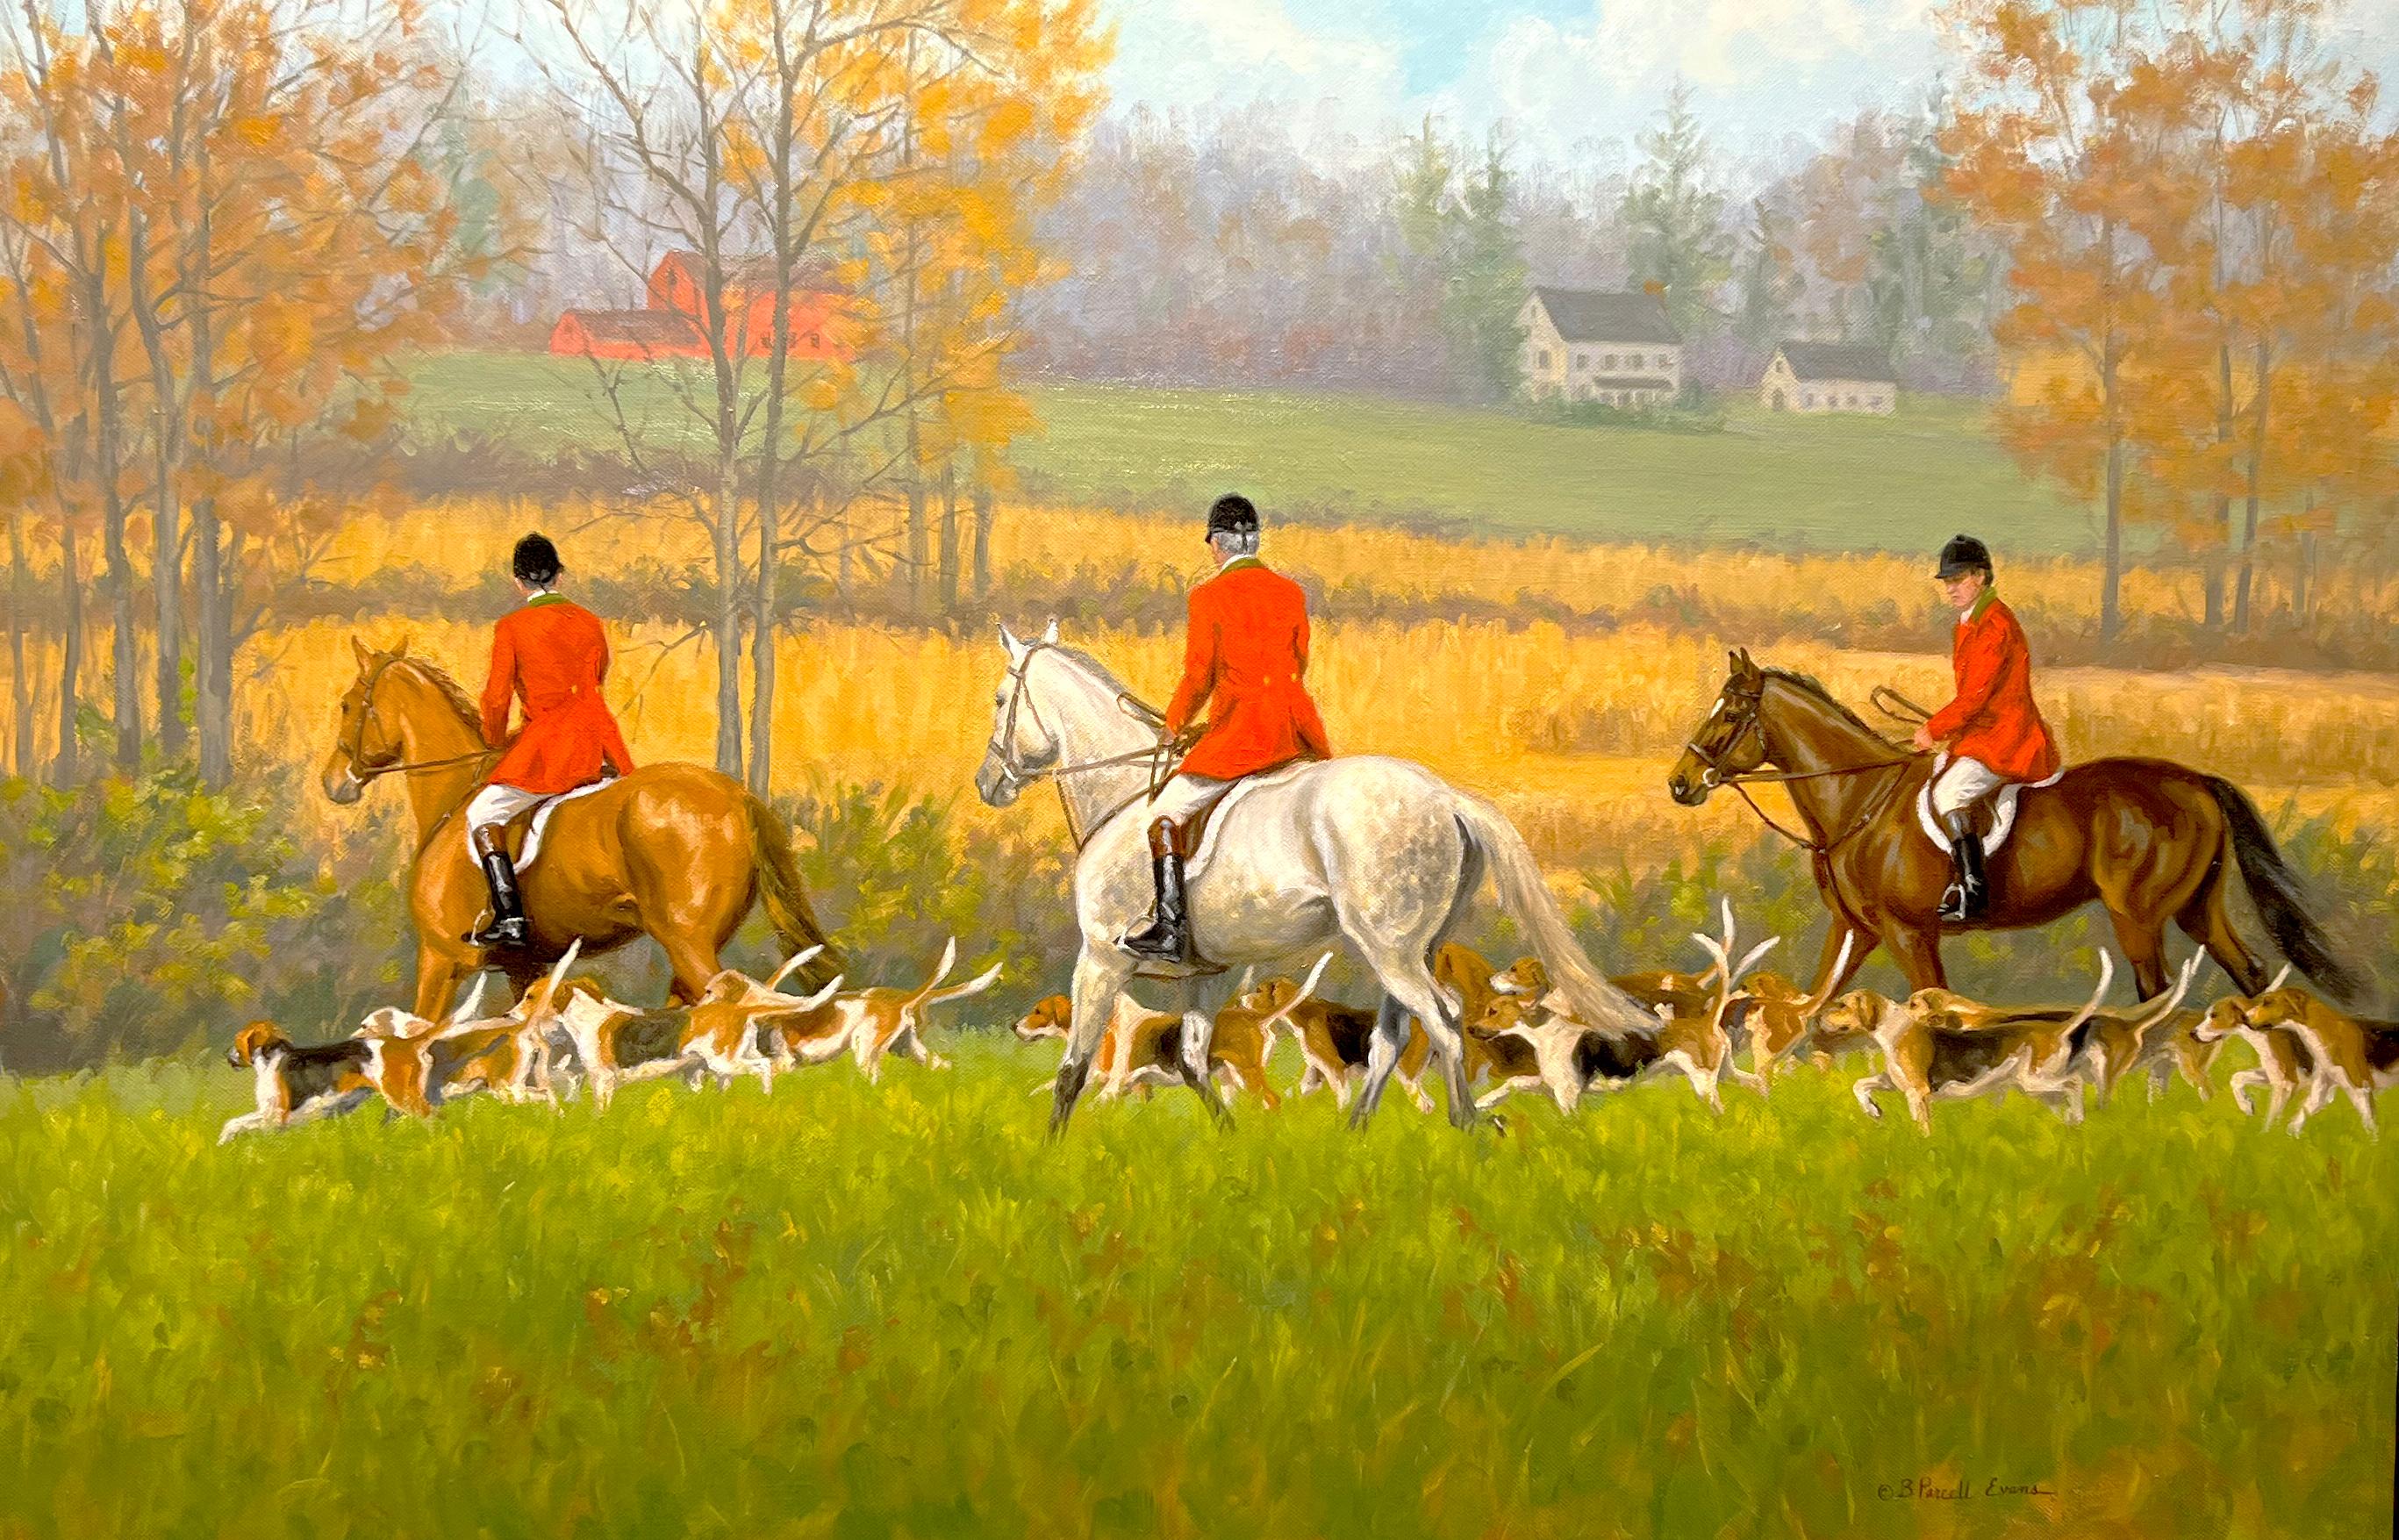 Beth Parcell, "Mid Morning Sun", 24x36 Fox Hound Hunt Landscape Oil Painting